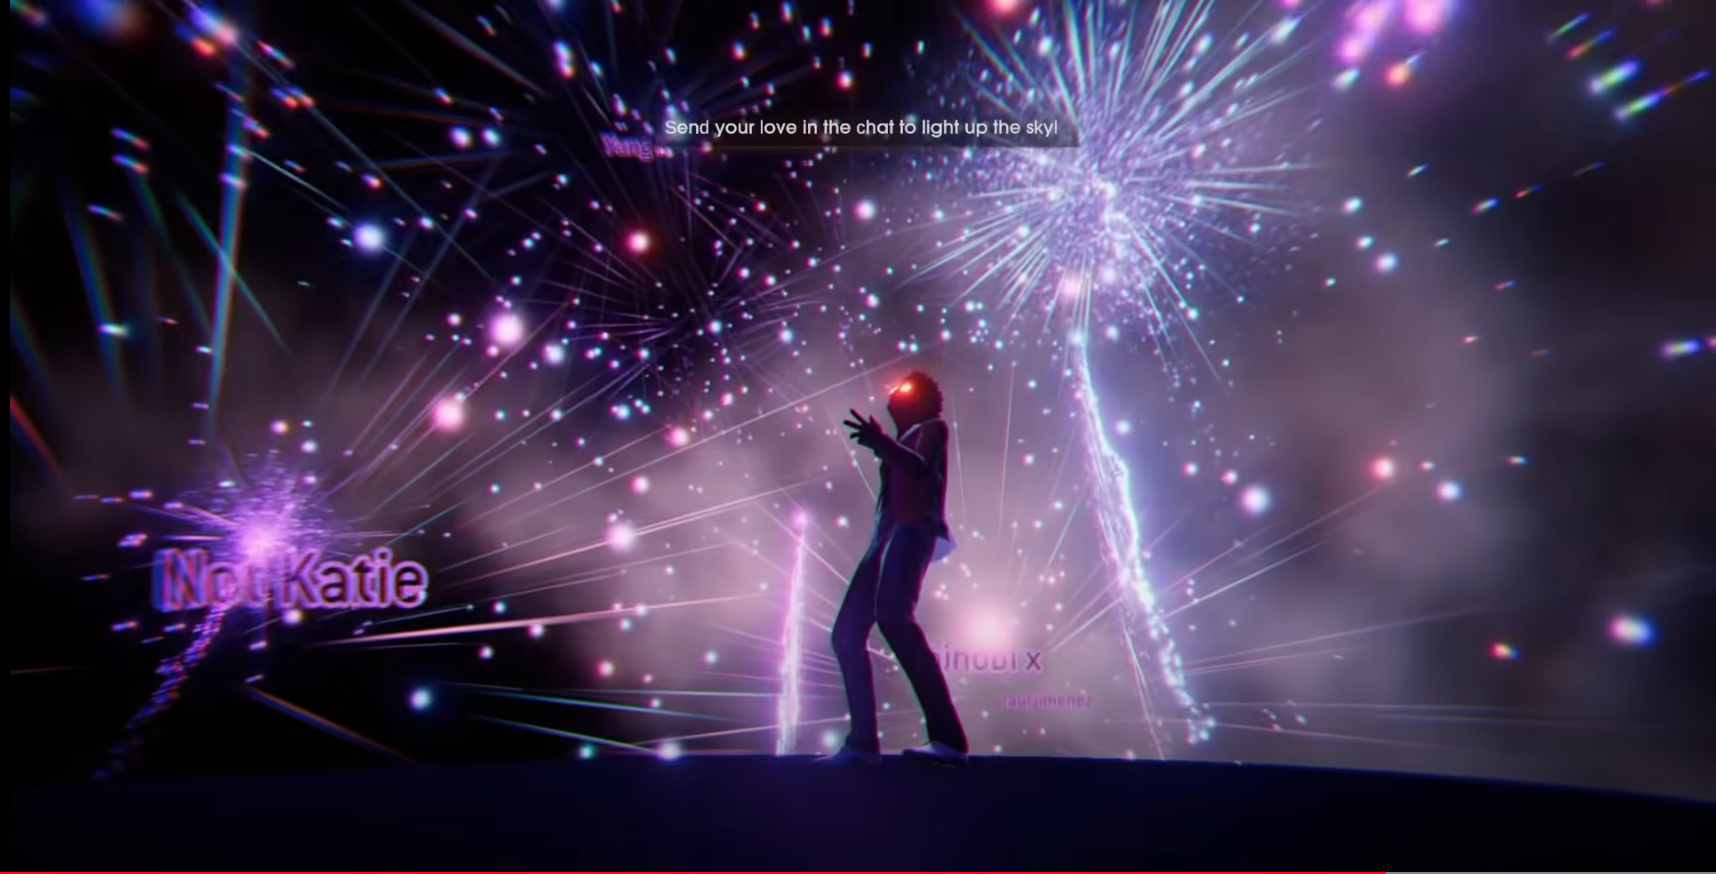 Virtual concerts to break through to the mainstream, or just a passing fad?